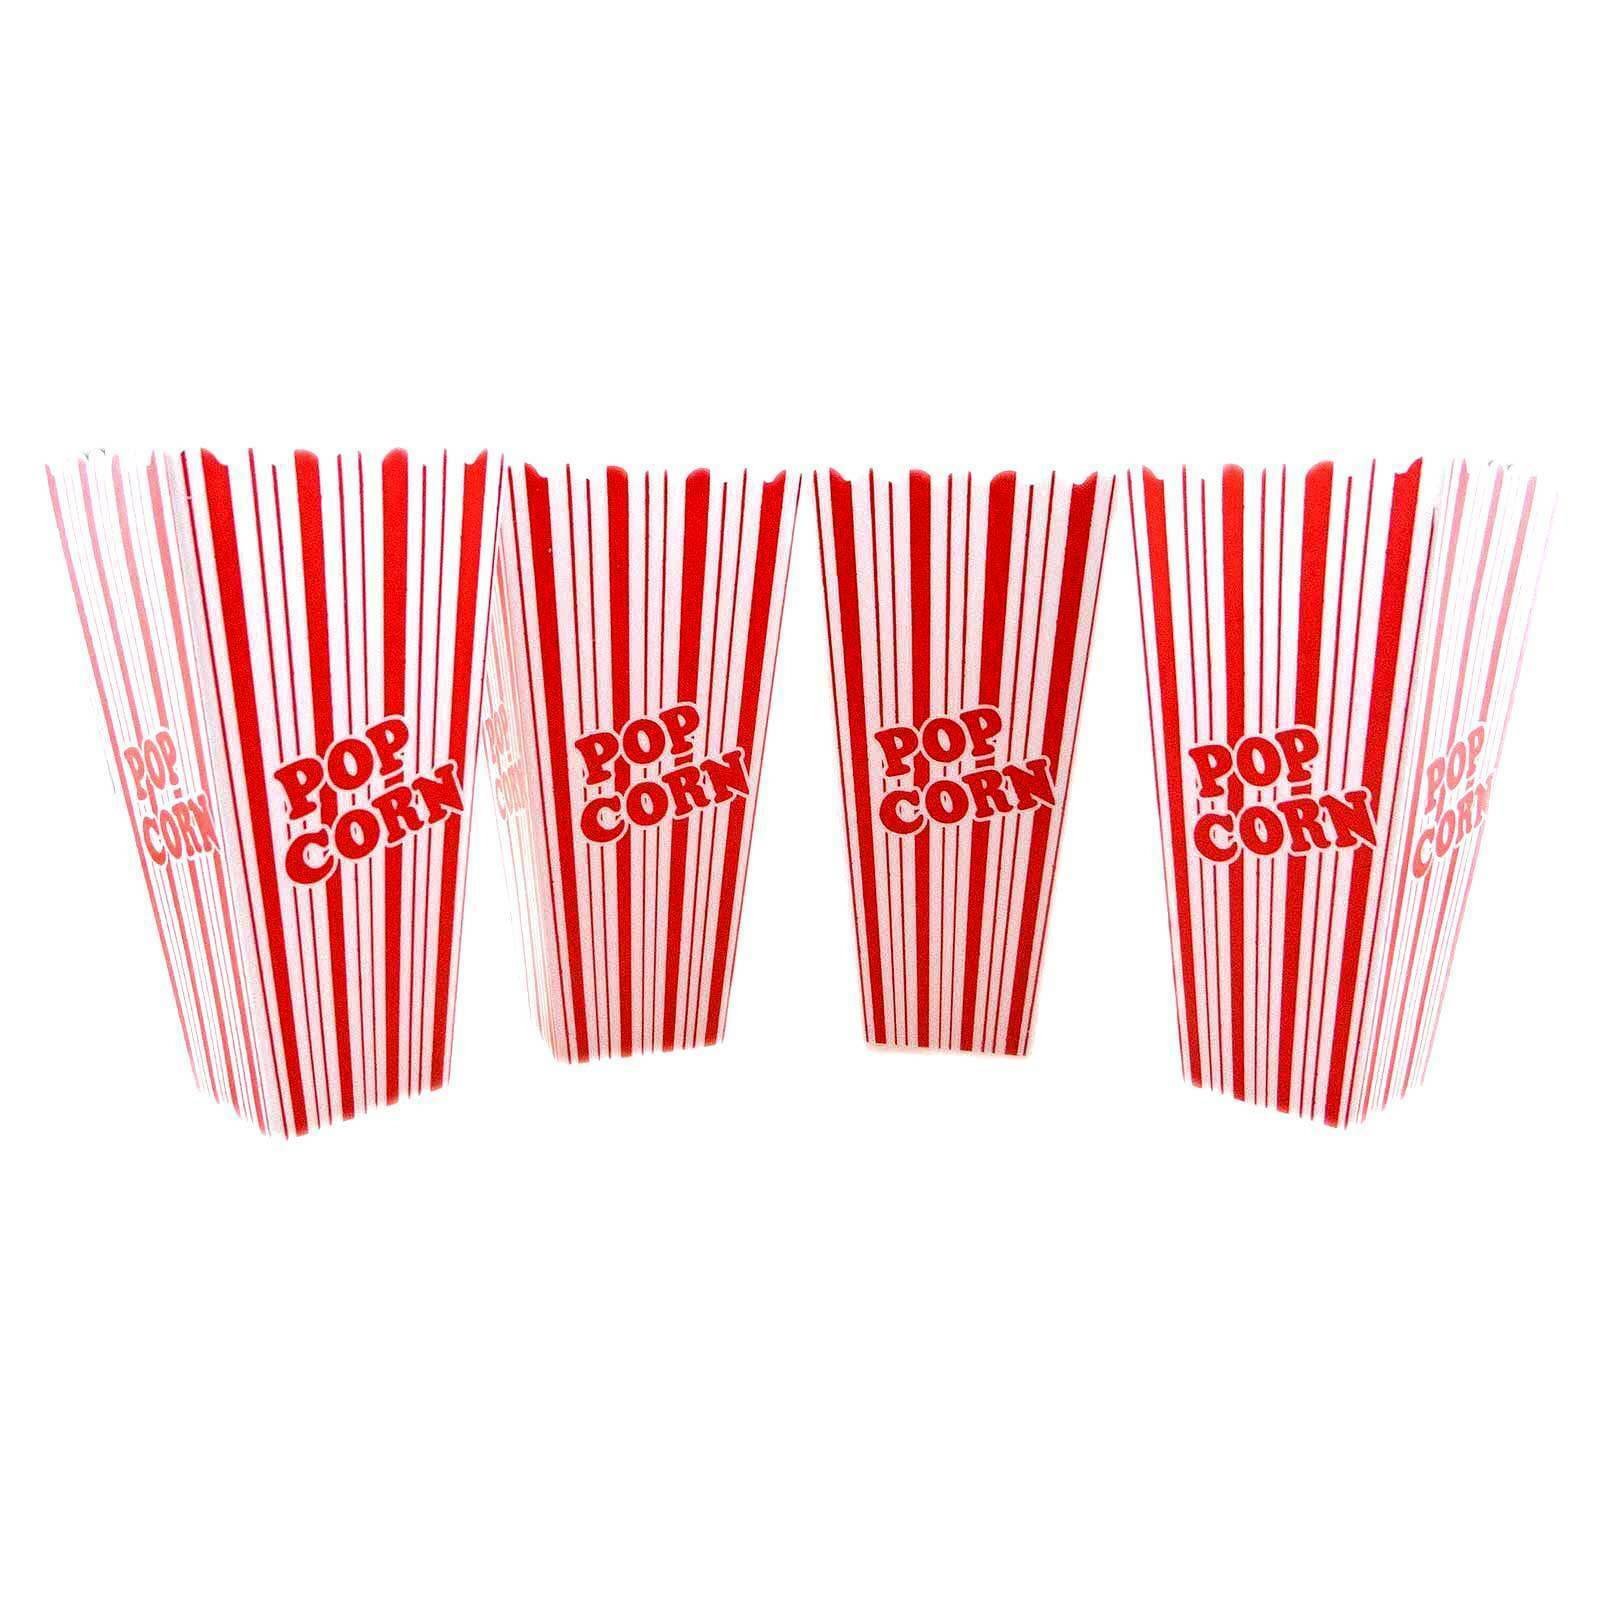 plastic-reusable-popcorn-container-movie-theater-style-red-white-set-of-4